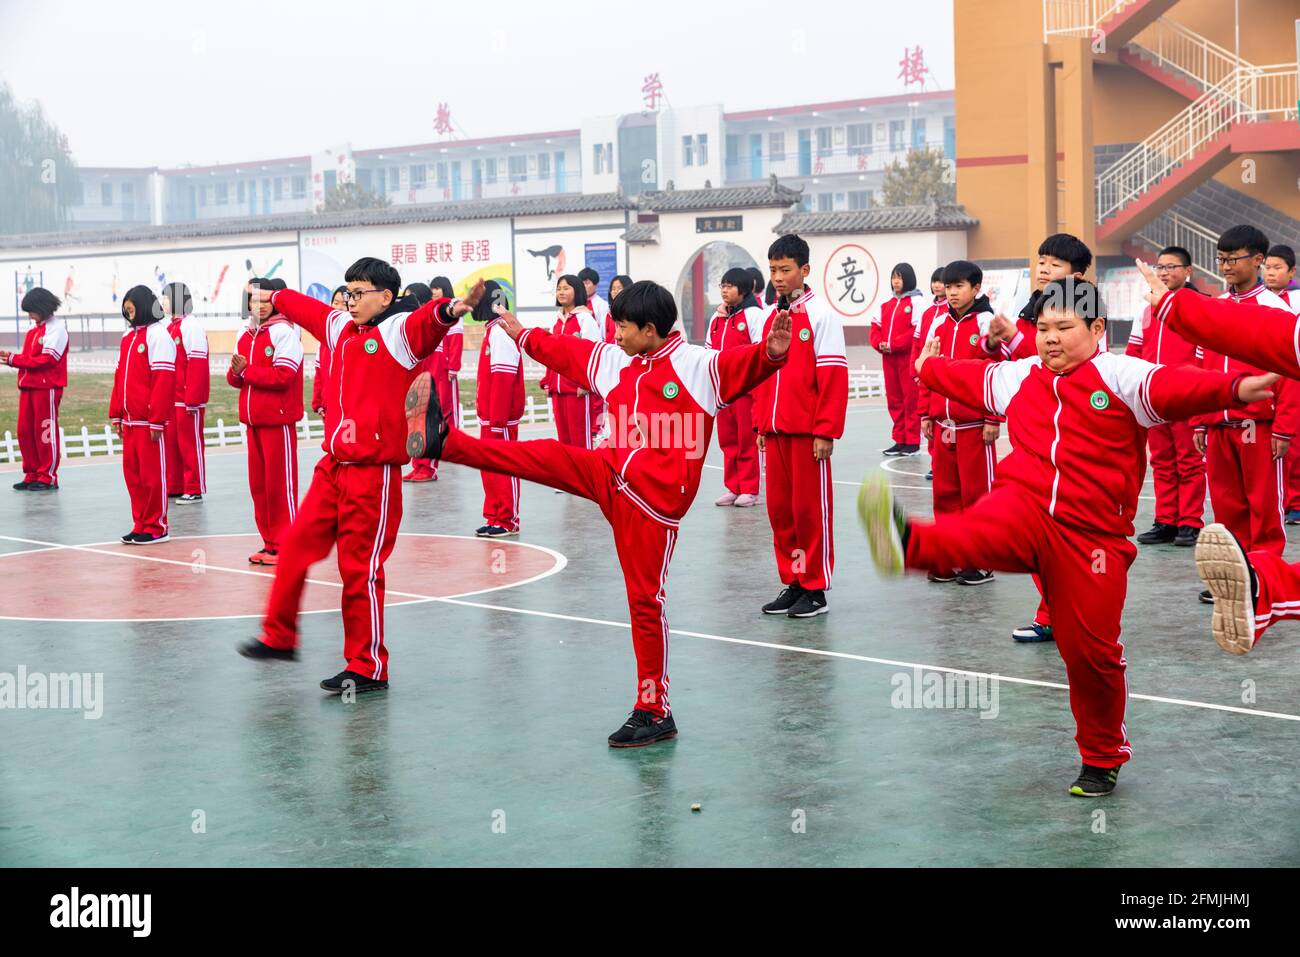 Students at a primary school in Lixian, Hebei, China doing their PE by doing wushu exercise. Stock Photo